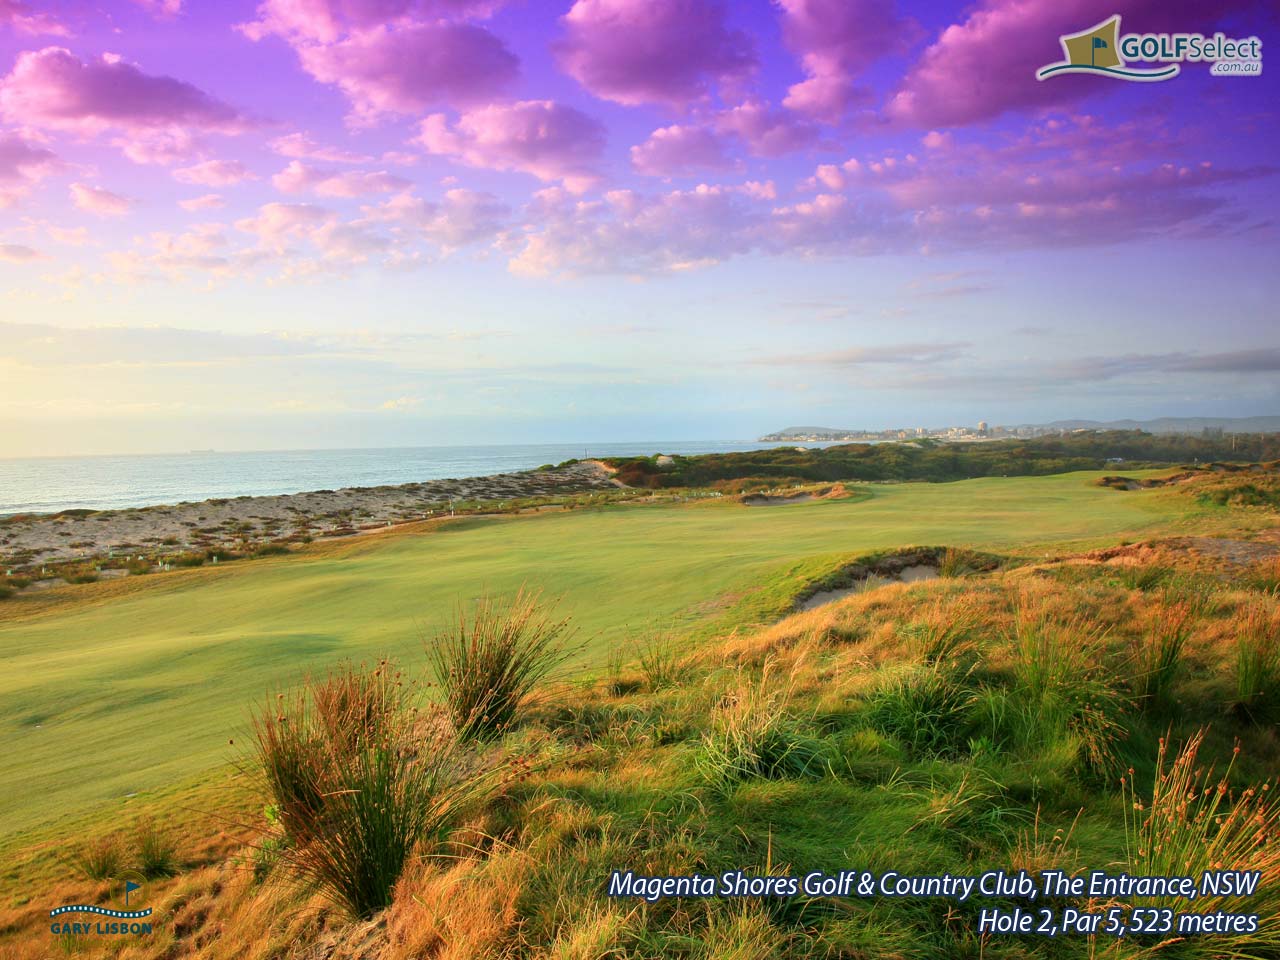 Pin Cool Golf Course Desktop Background Wallpaper And Pictures On